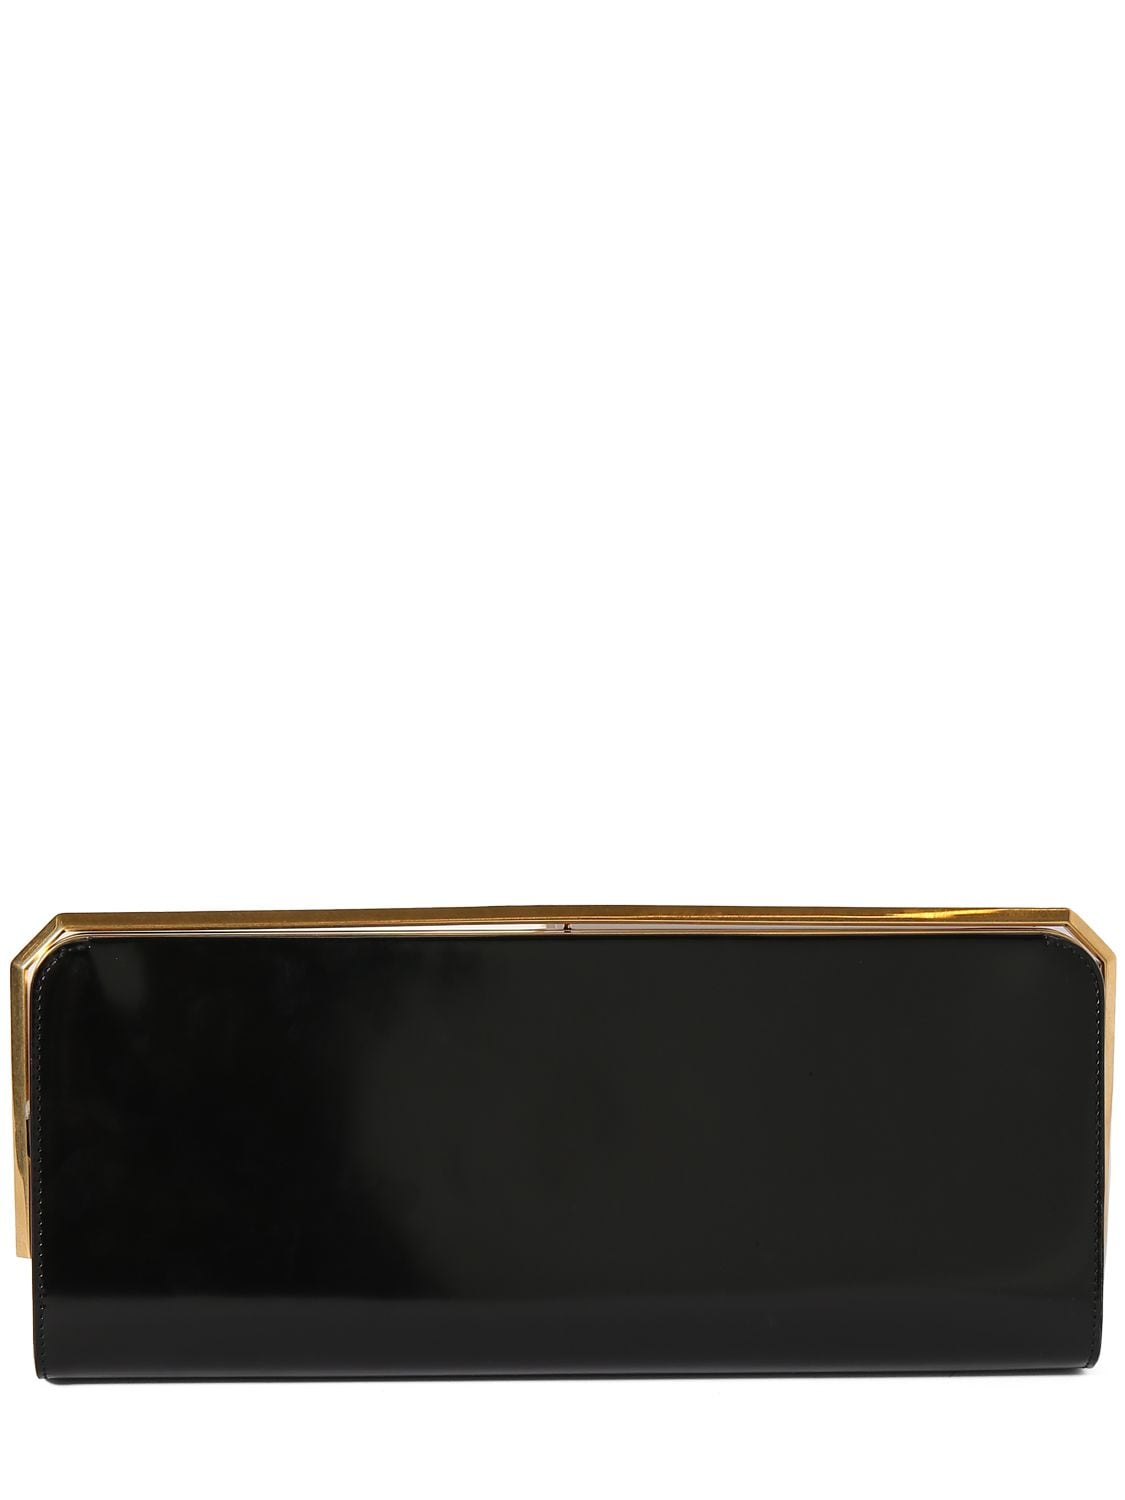 Shop Saint Laurent Date Minaudiere Brushed Leather Clutch In Black